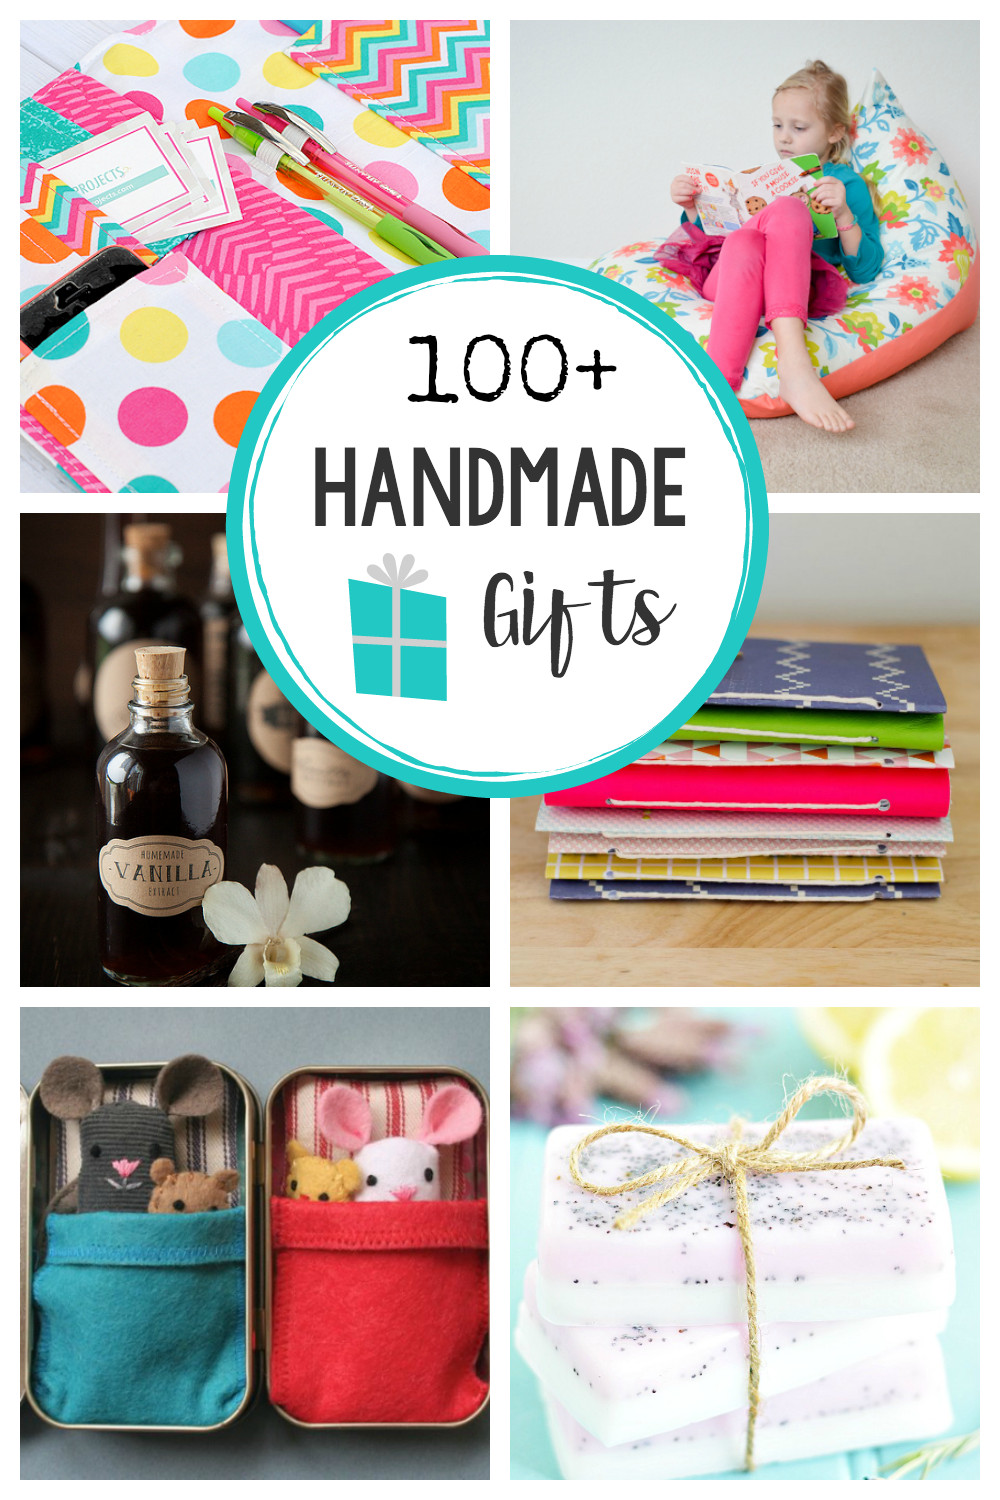 Handmade Birthday Gift Ideas
 Tons of Handmade Gifts 100 Ideas for Everyone on Your List